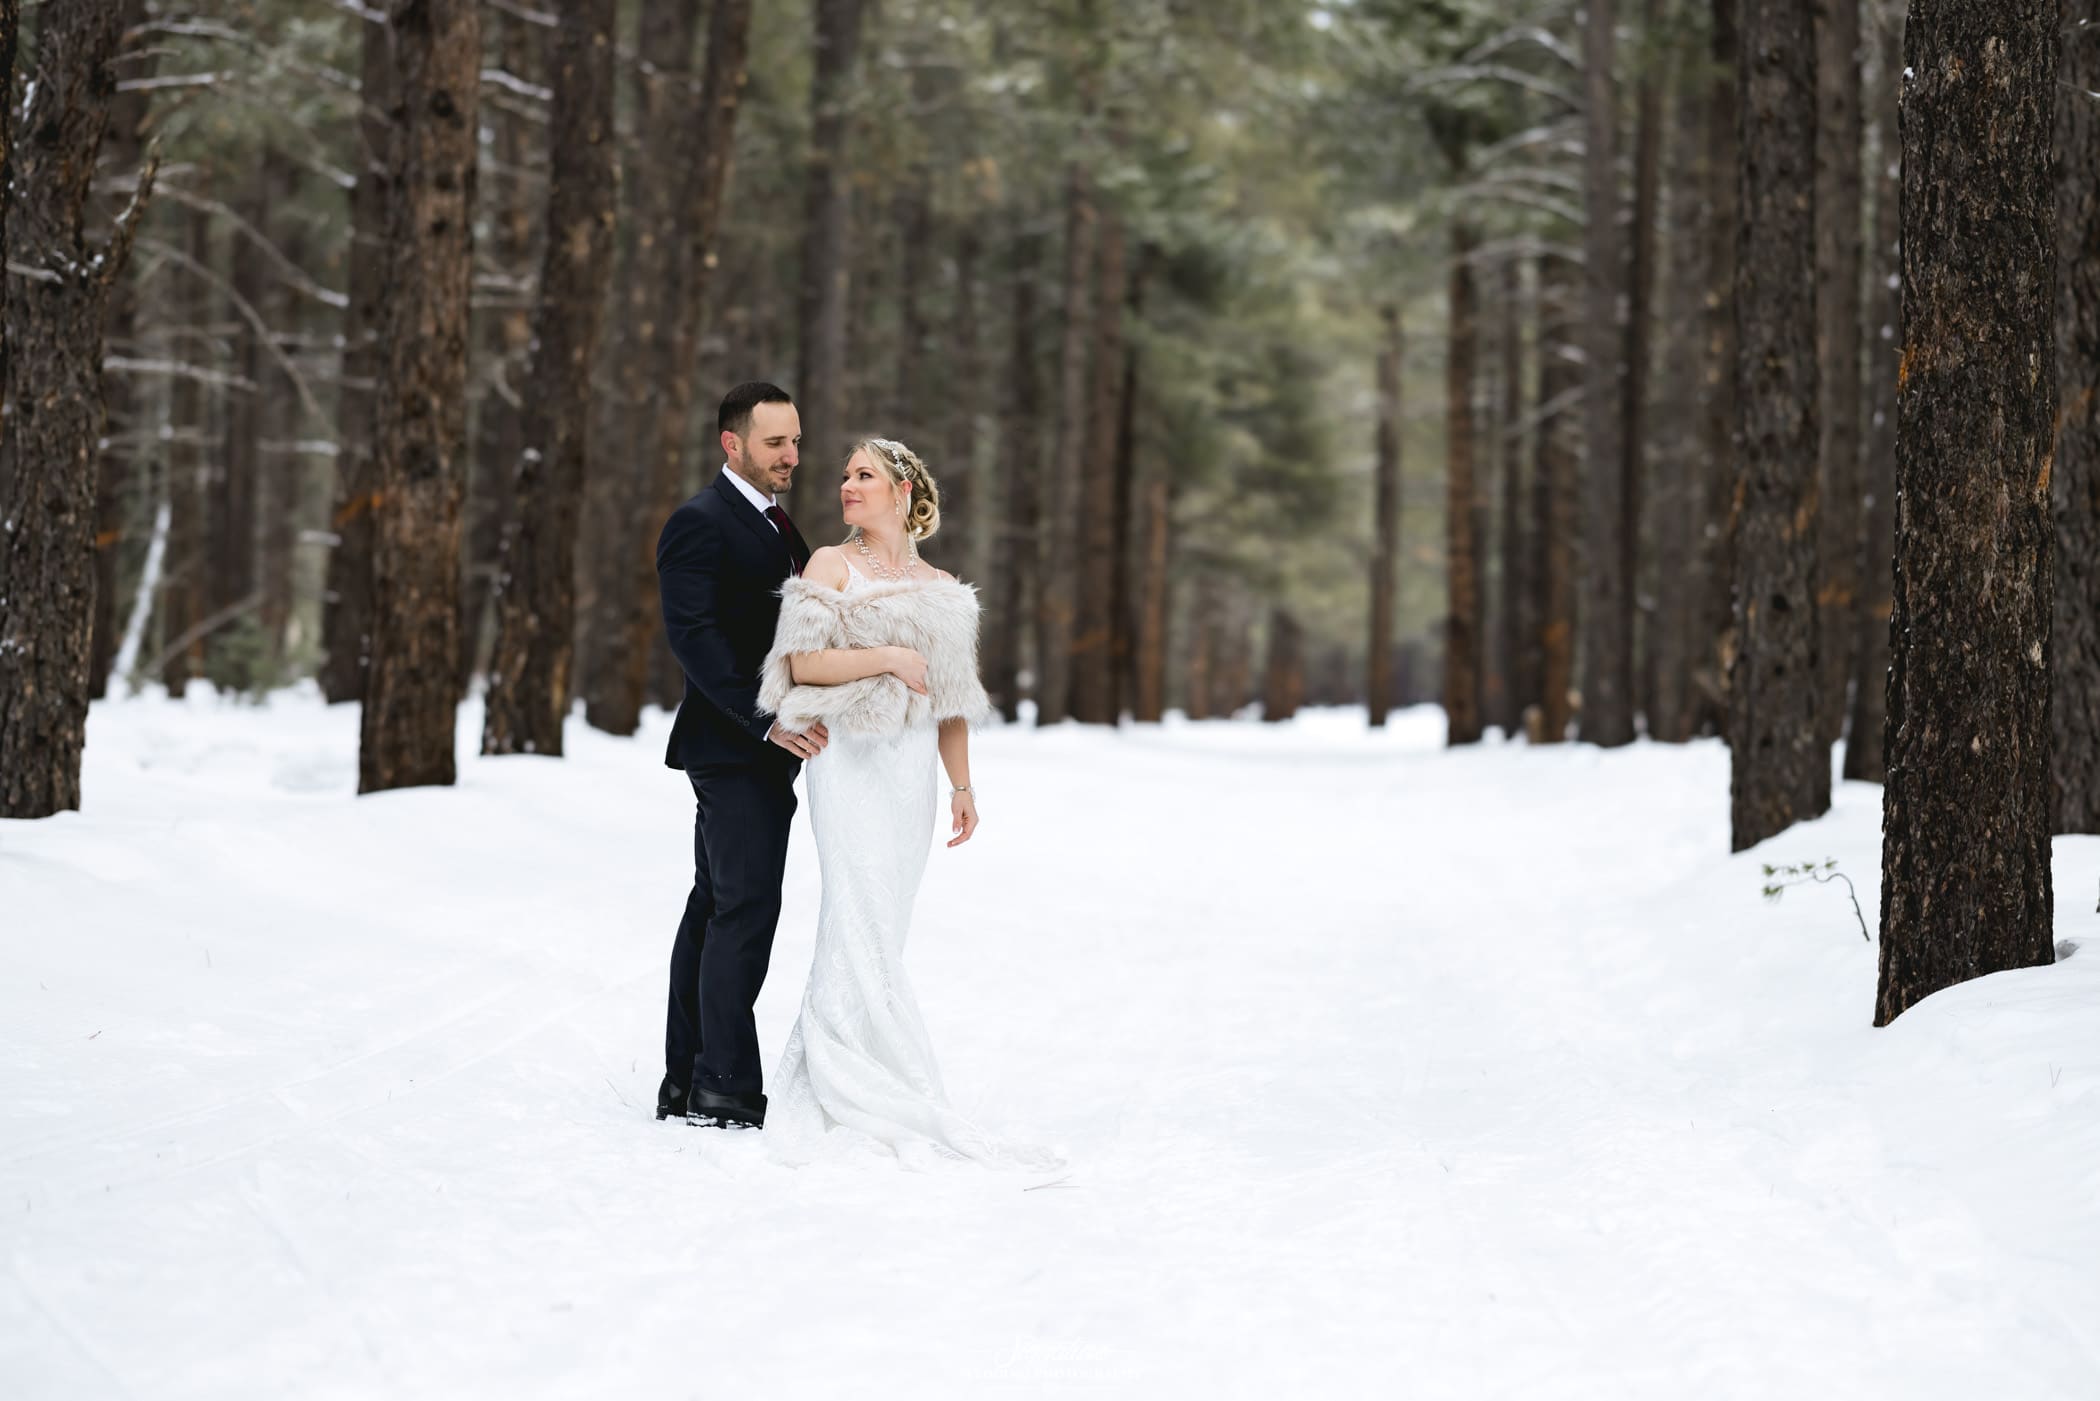 Bride and groom looking at each other in forest with snow